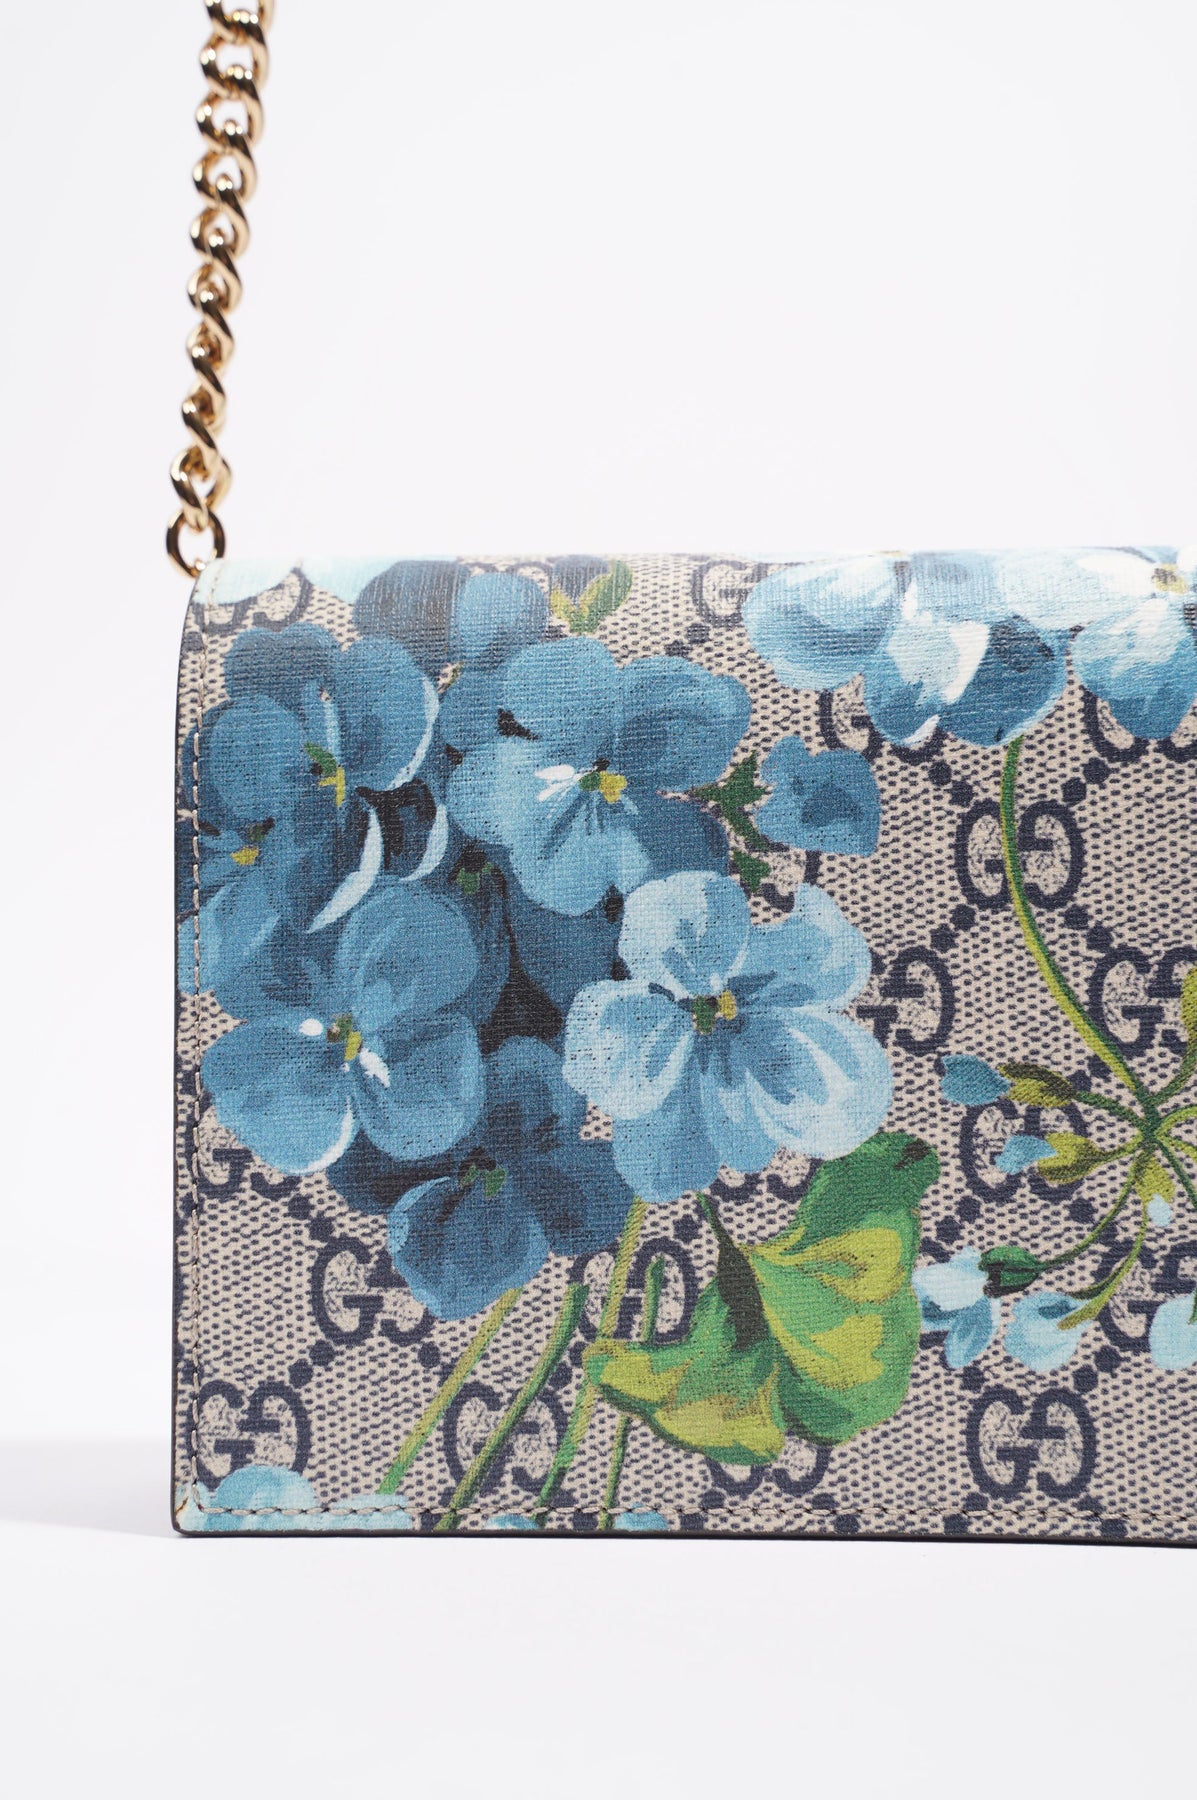 Gucci GG Blooms Canvas Duffle Bag in Blue